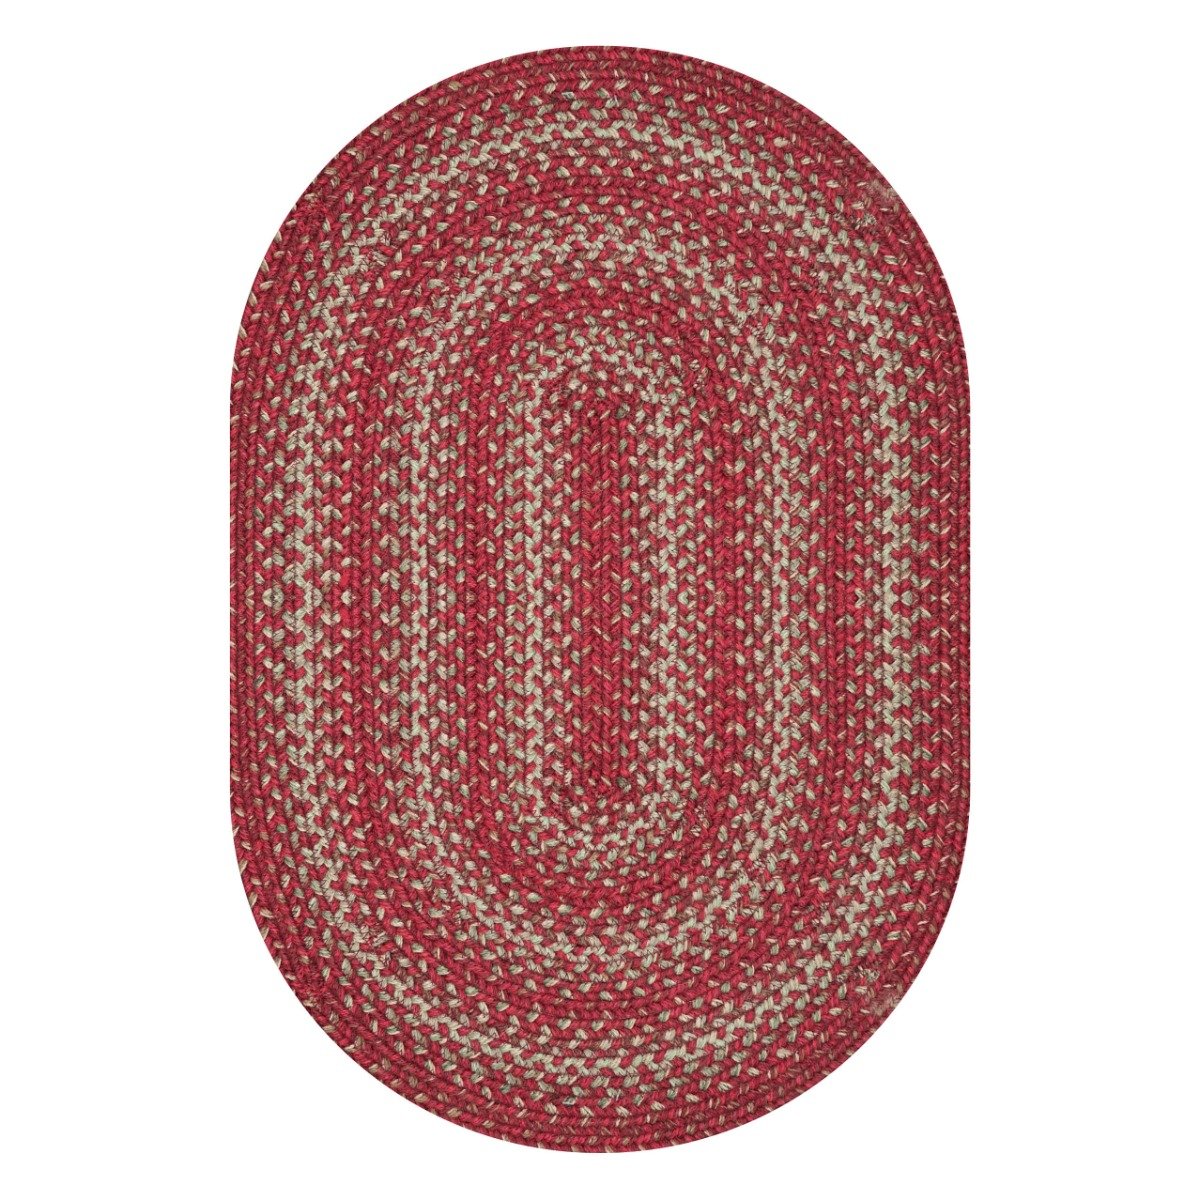 https://cdn.homespice.com/media/catalog/product/a/p/apple_pie_red_oval_jute_braided_rug-silo_6.jpg?width=1500&height=1500&store=retail&image-type=image